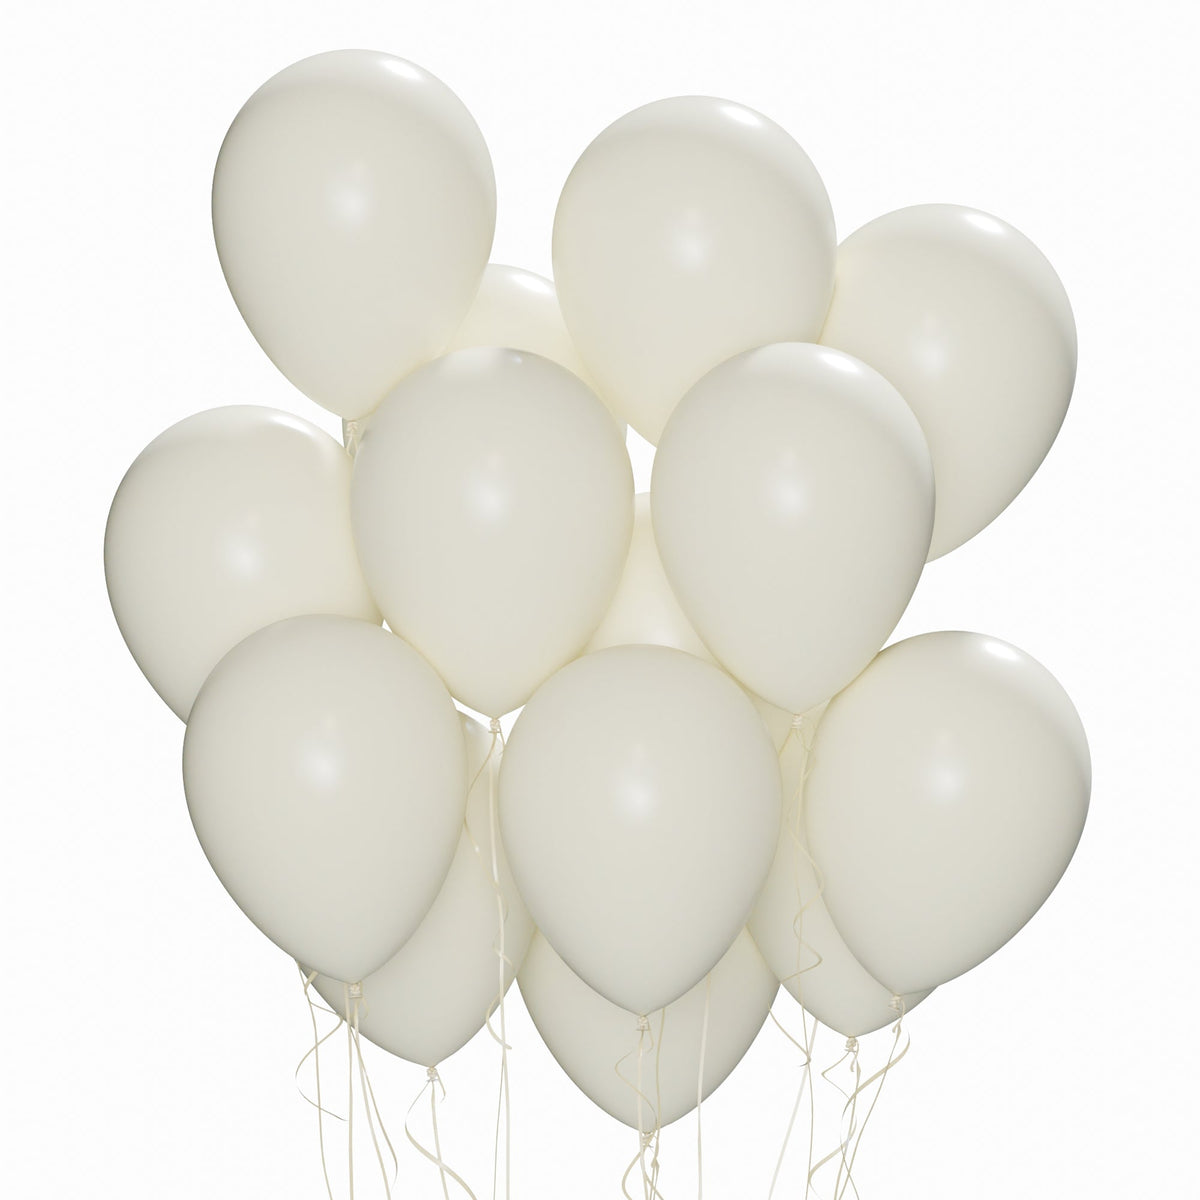 WIDE OCEAN INTERNATIONAL TRADE BEIJING CO., LTD Balloons Ivory Latex Balloon 12 Inches, 72 Count 810077656372